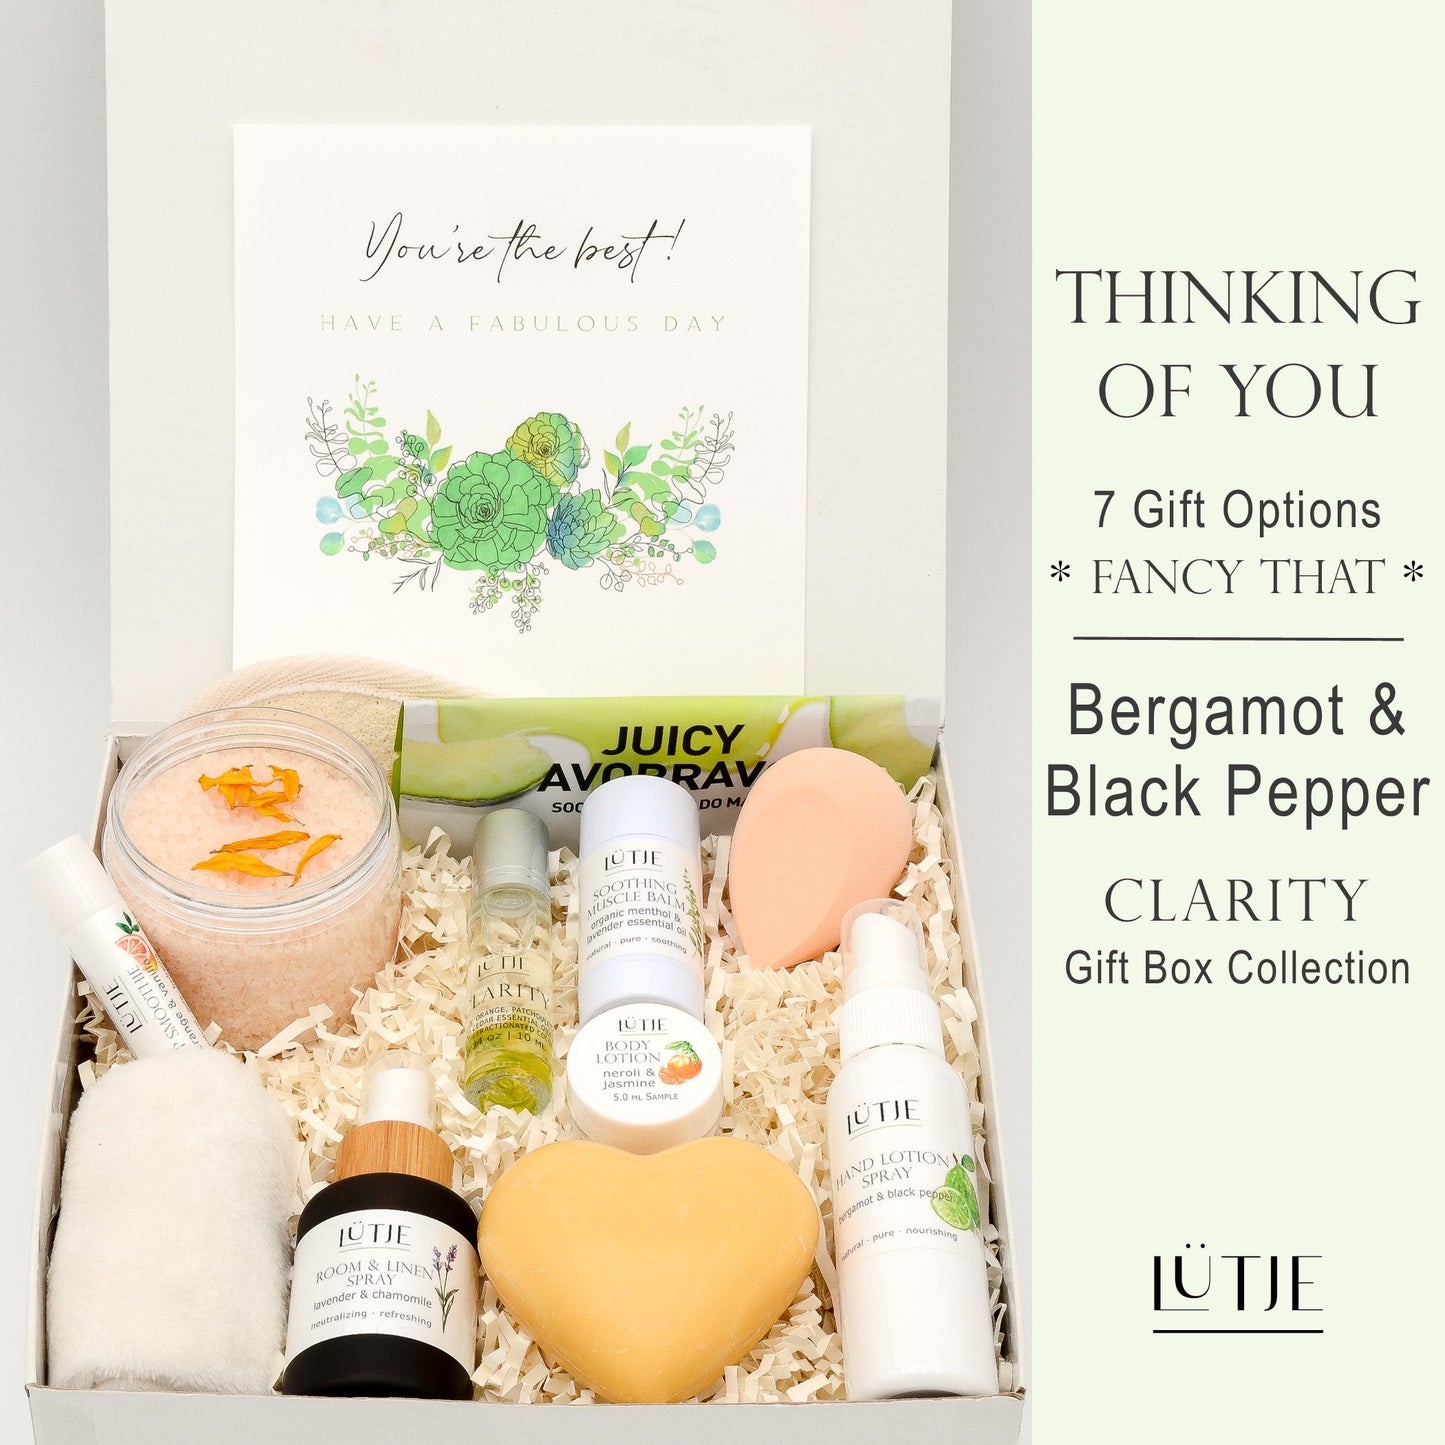 Gift Boxes for women, wife, daughter, BFF, sister, mom, or grandma, includes Bergamot & Black Pepper hand lotion spray and body lotion, essential oil, lip balm, soothing muscle balm, Lavender & Chamomile room & linen spray, French soap, French bath salts, hydrating face mask, other bath, spa and self-care items, and 18K gold-plated necklace with engraved heart.